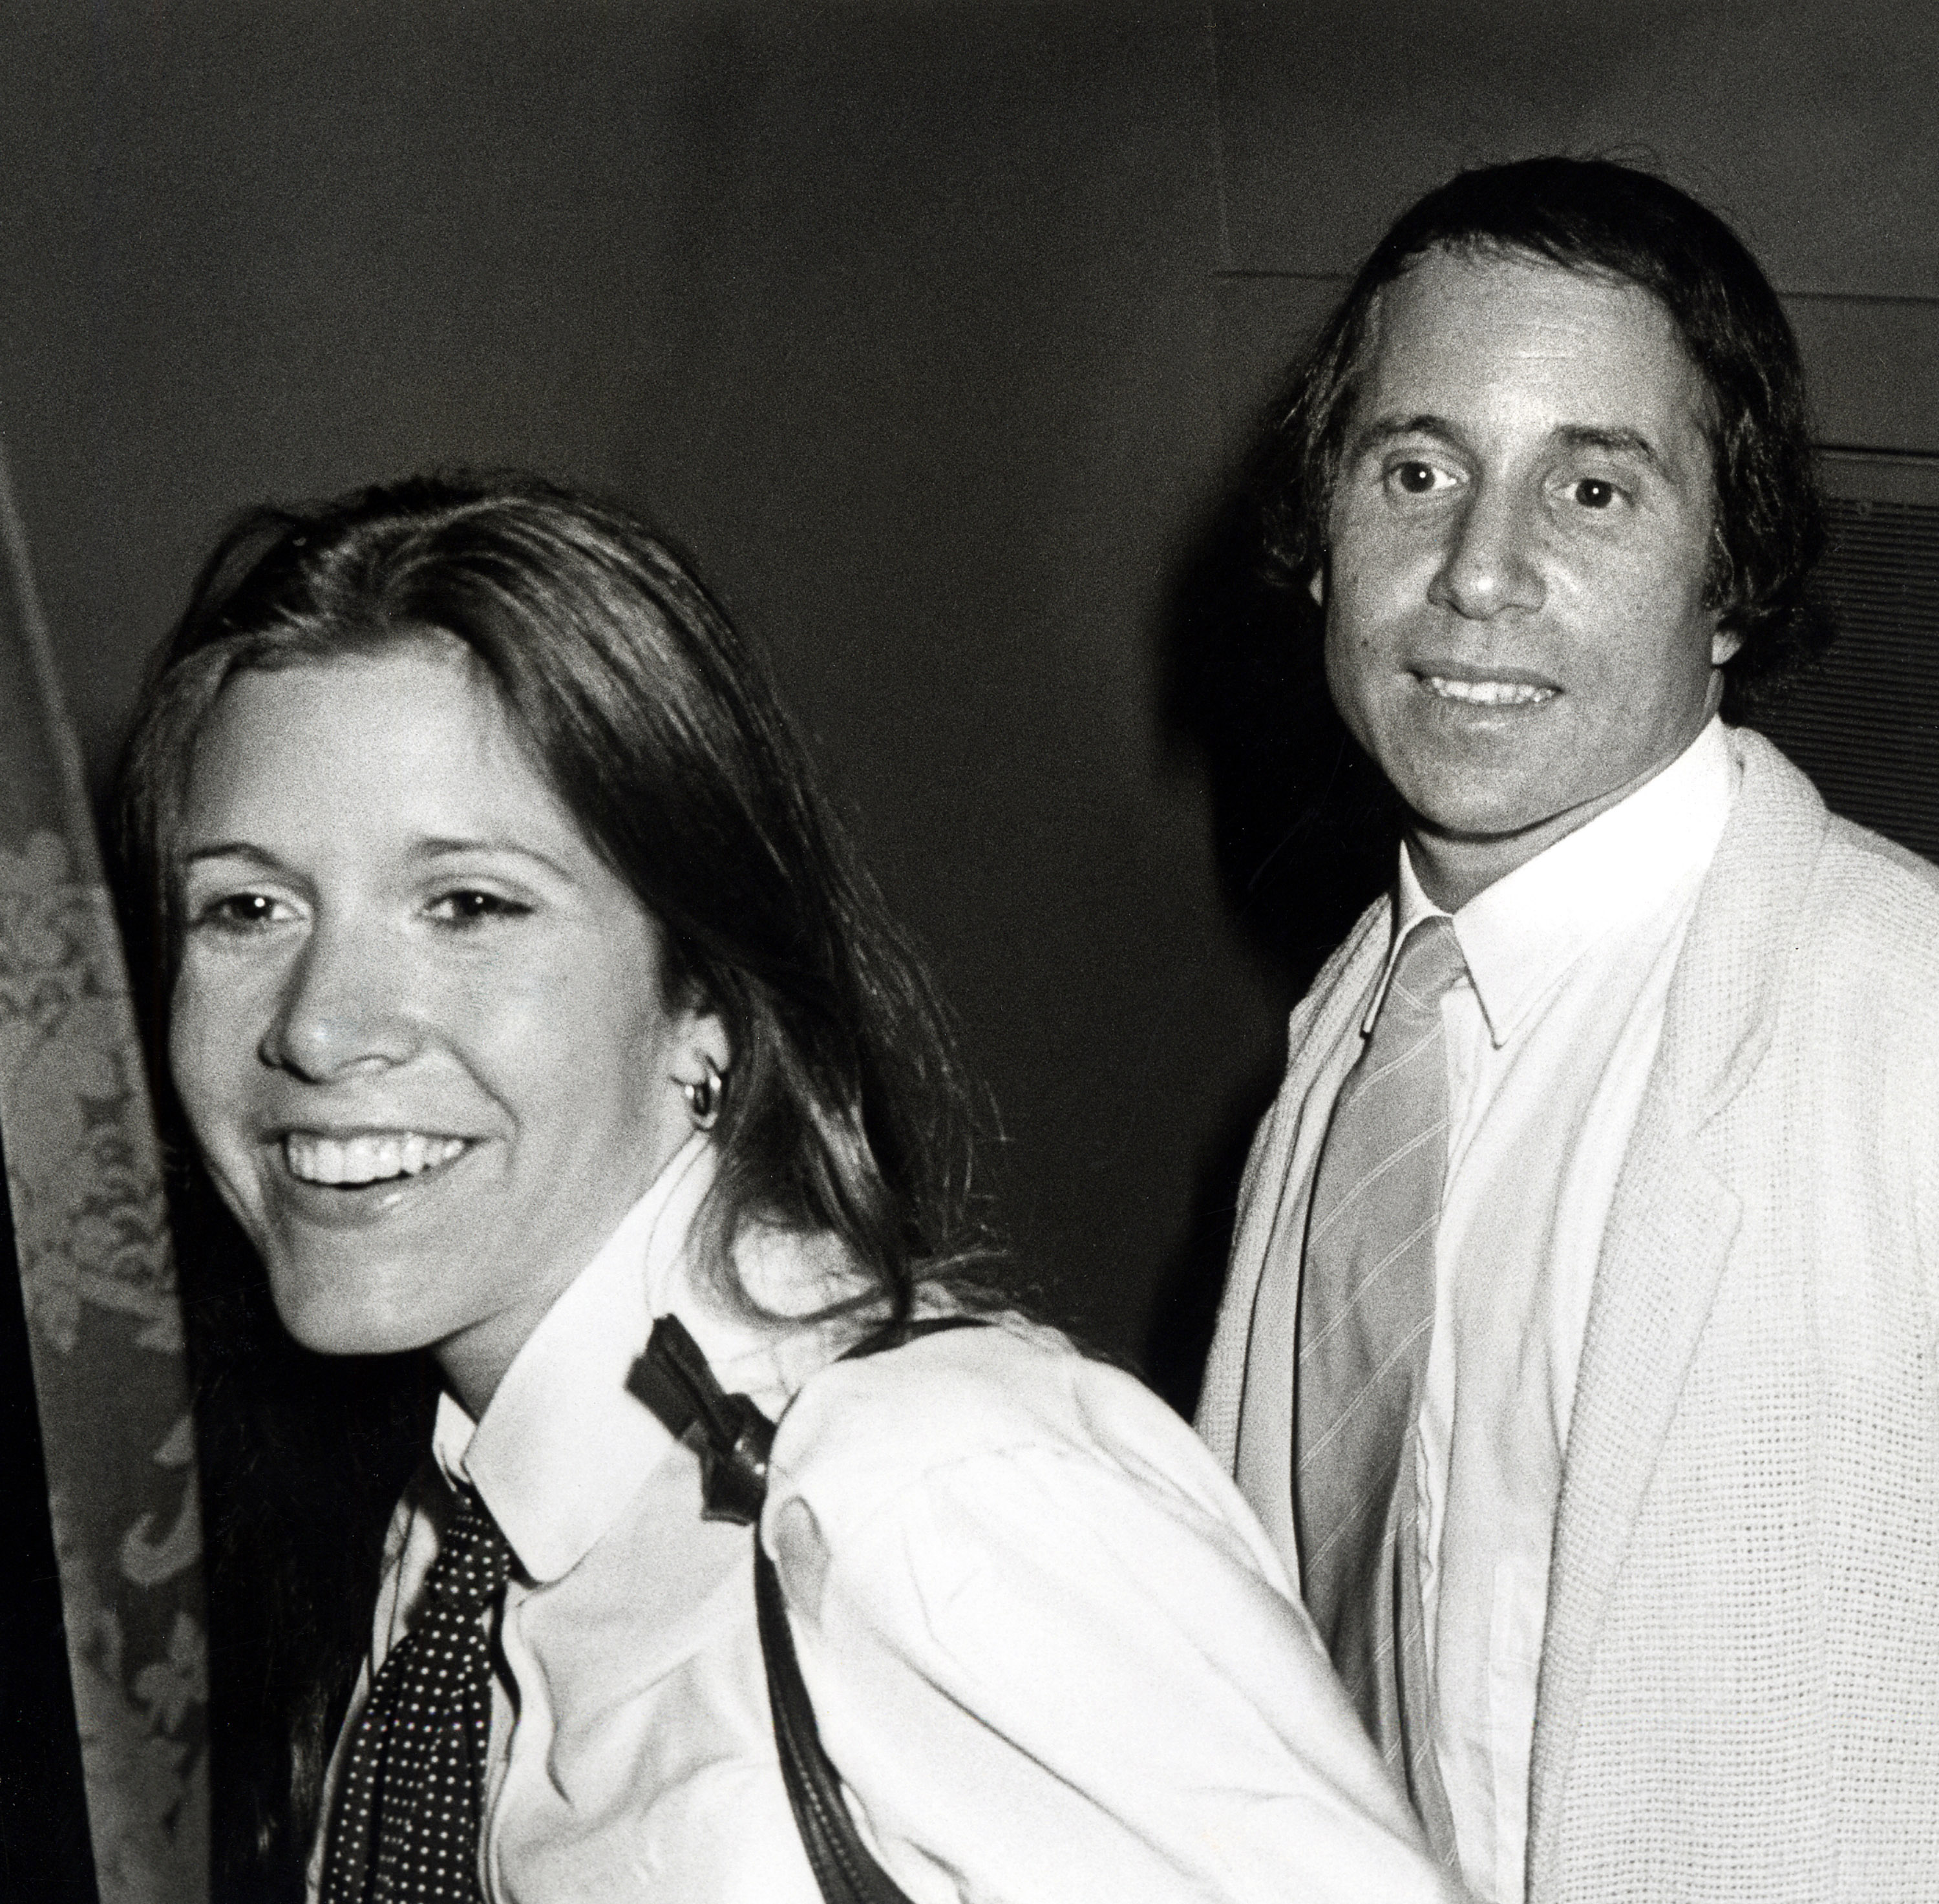 Carrie Fisher and Paul Simon in 1979